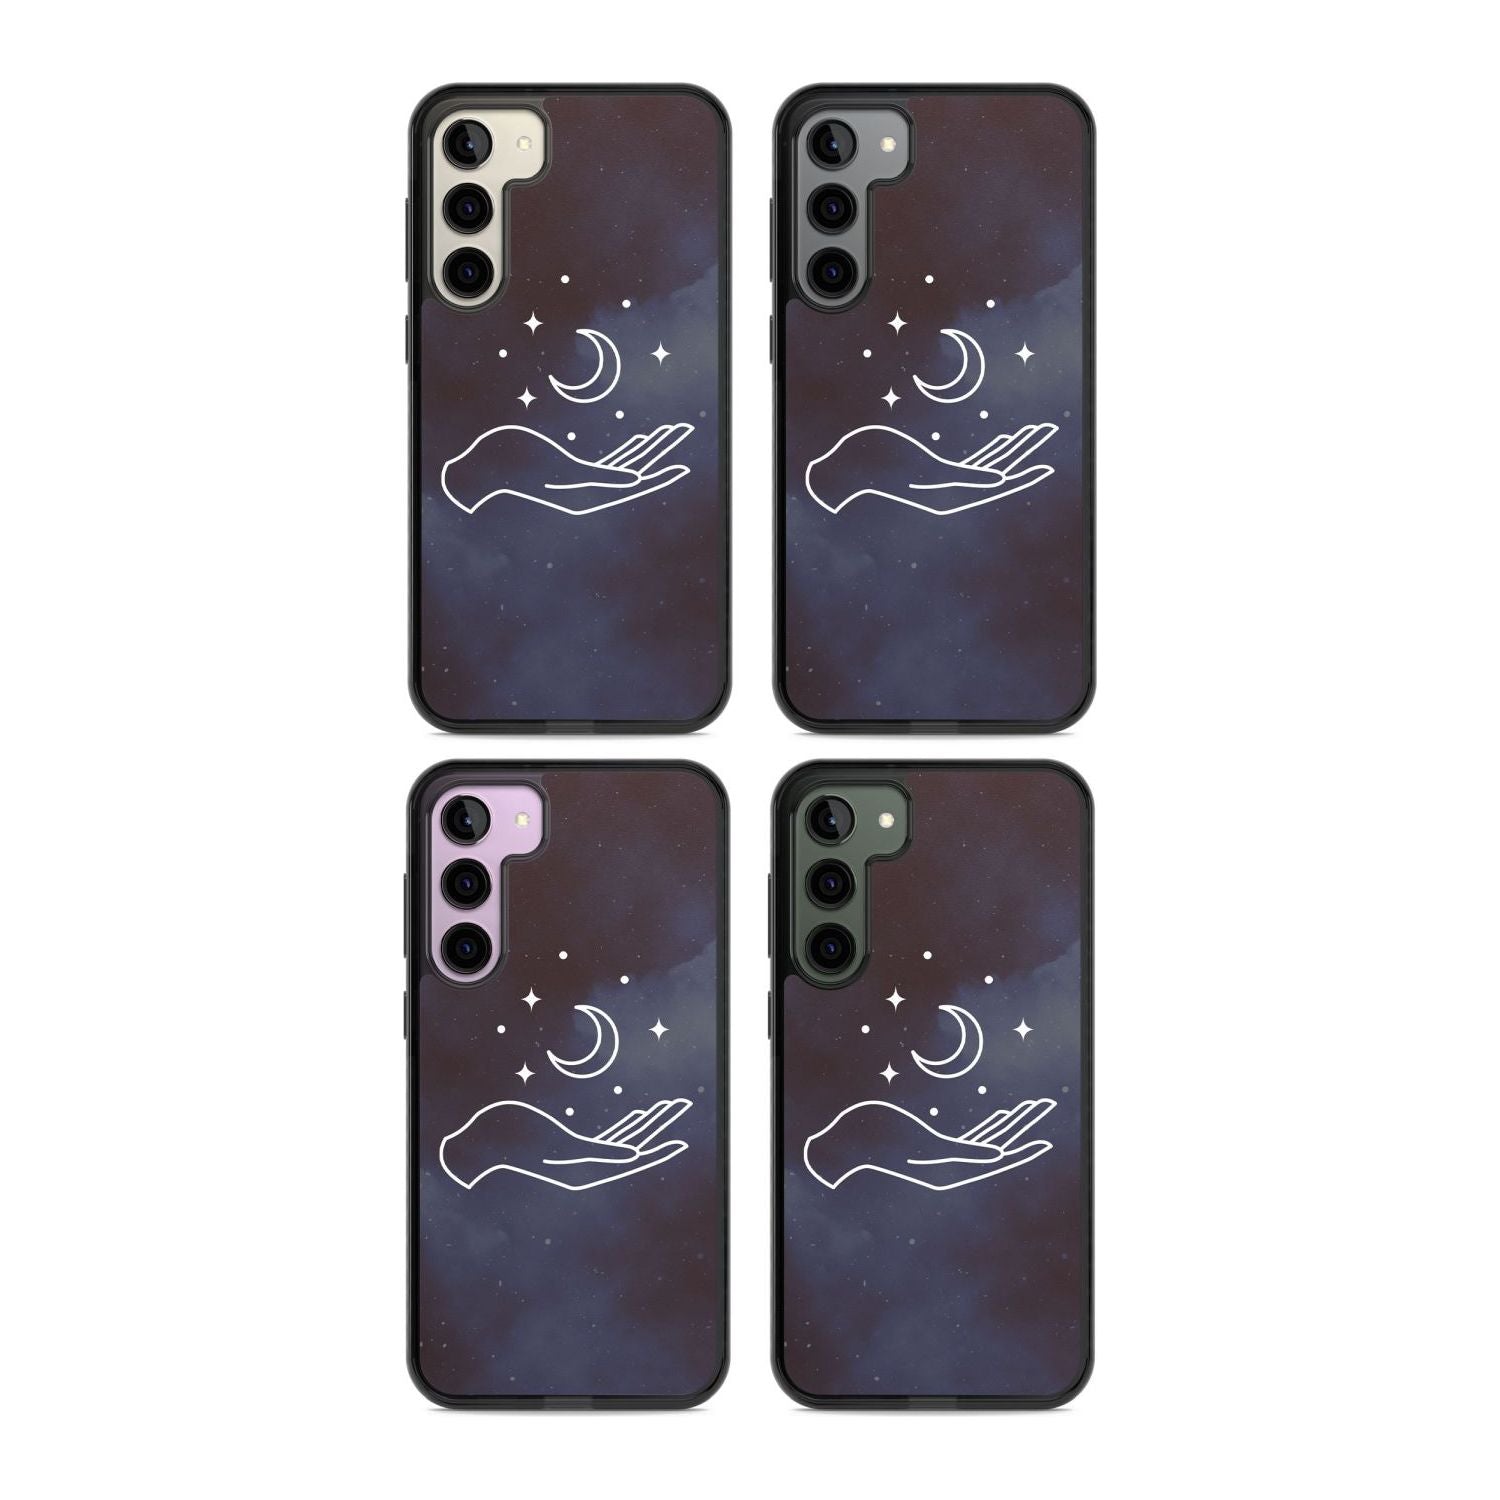 Floating Moon Above Hand Phone Case iPhone 15 Pro Max / Black Impact Case,iPhone 15 Plus / Black Impact Case,iPhone 15 Pro / Black Impact Case,iPhone 15 / Black Impact Case,iPhone 15 Pro Max / Impact Case,iPhone 15 Plus / Impact Case,iPhone 15 Pro / Impact Case,iPhone 15 / Impact Case,iPhone 15 Pro Max / Magsafe Black Impact Case,iPhone 15 Plus / Magsafe Black Impact Case,iPhone 15 Pro / Magsafe Black Impact Case,iPhone 15 / Magsafe Black Impact Case,iPhone 14 Pro Max / Black Impact Case,iPhone 14 Plus / Bl